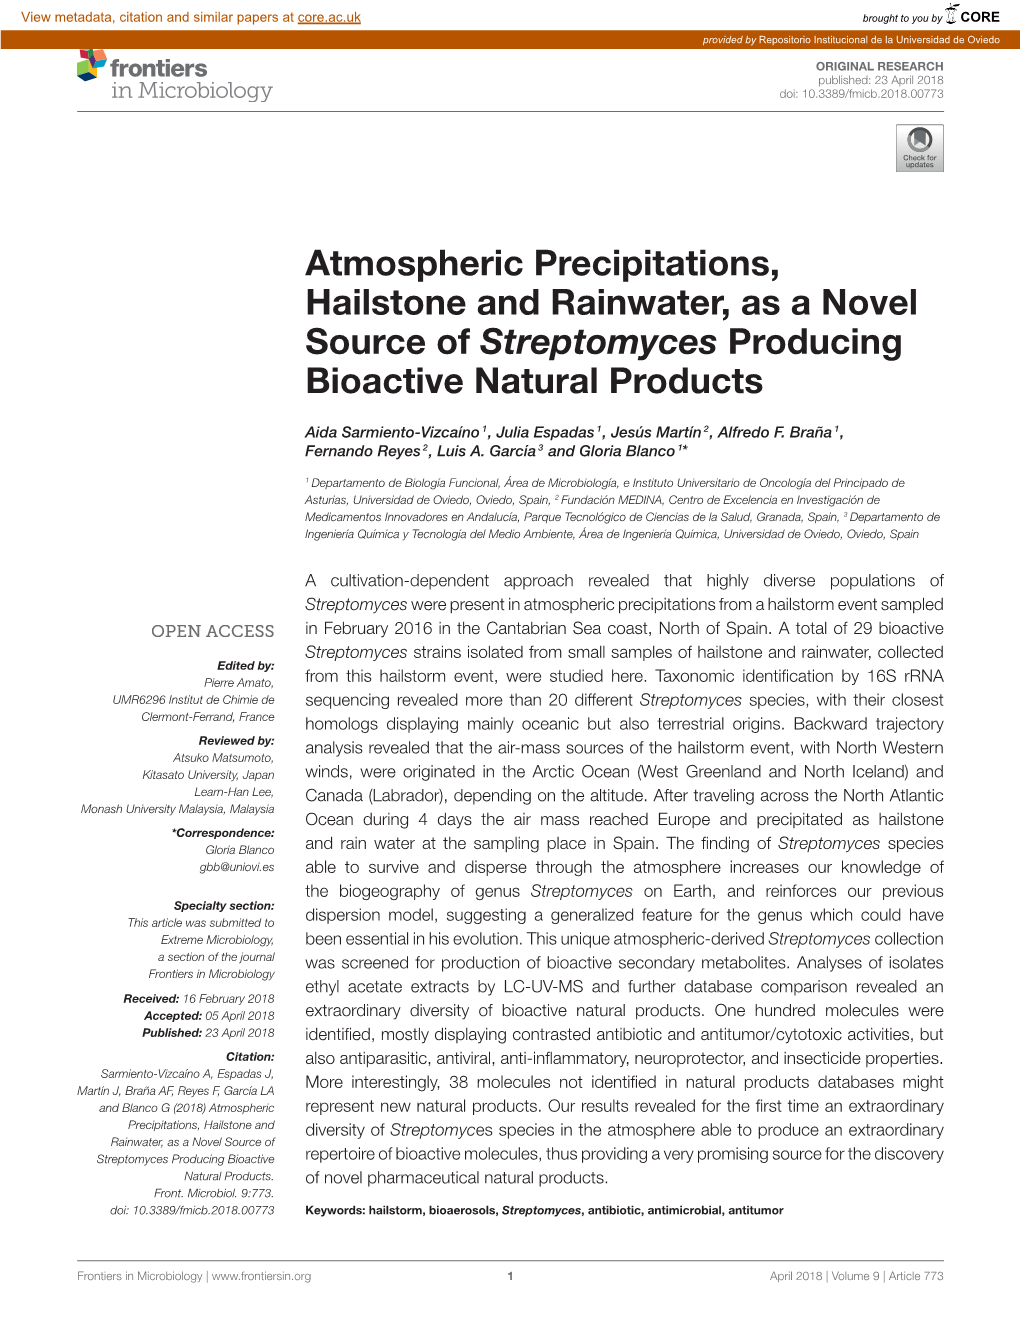 Atmospheric Precipitations, Hailstone and Rainwater, As a Novel Source of Streptomyces Producing Bioactive Natural Products